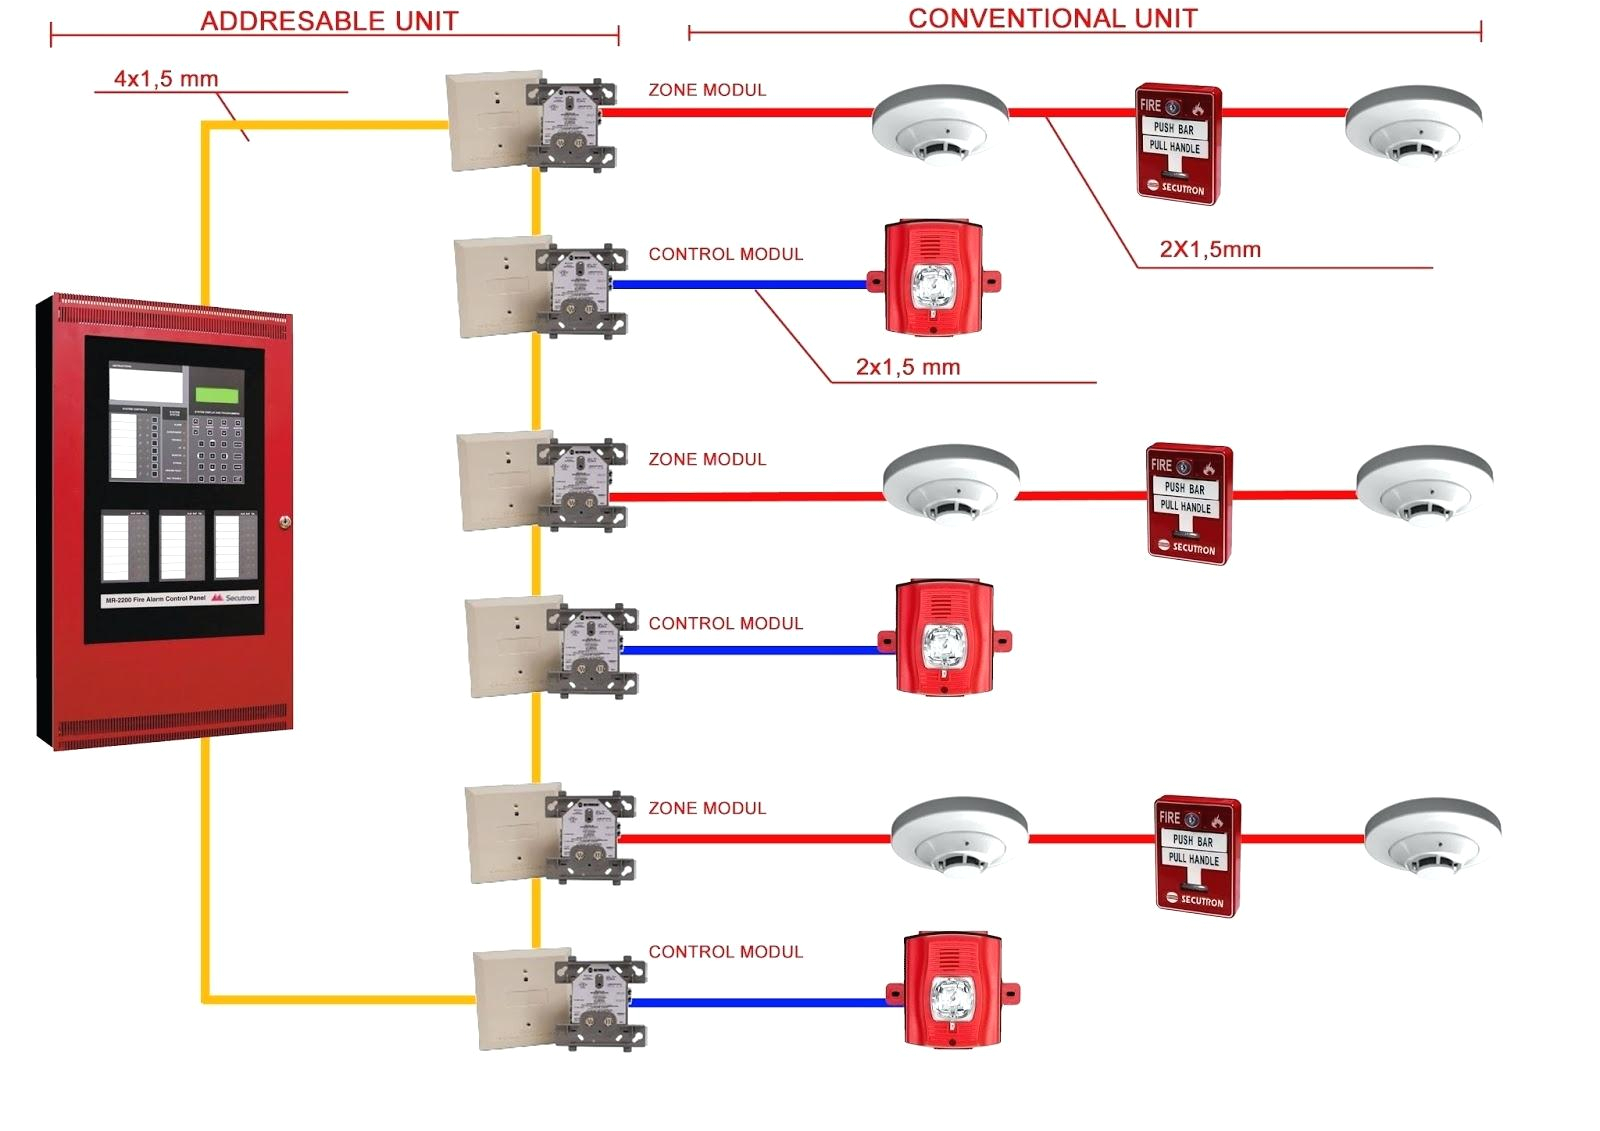 fire alarm system wiring diagram fire alarm wiring diagram collection addressable fire alarm wiring diagram volovets info and smoke detector download wiring diagram 11b jpg